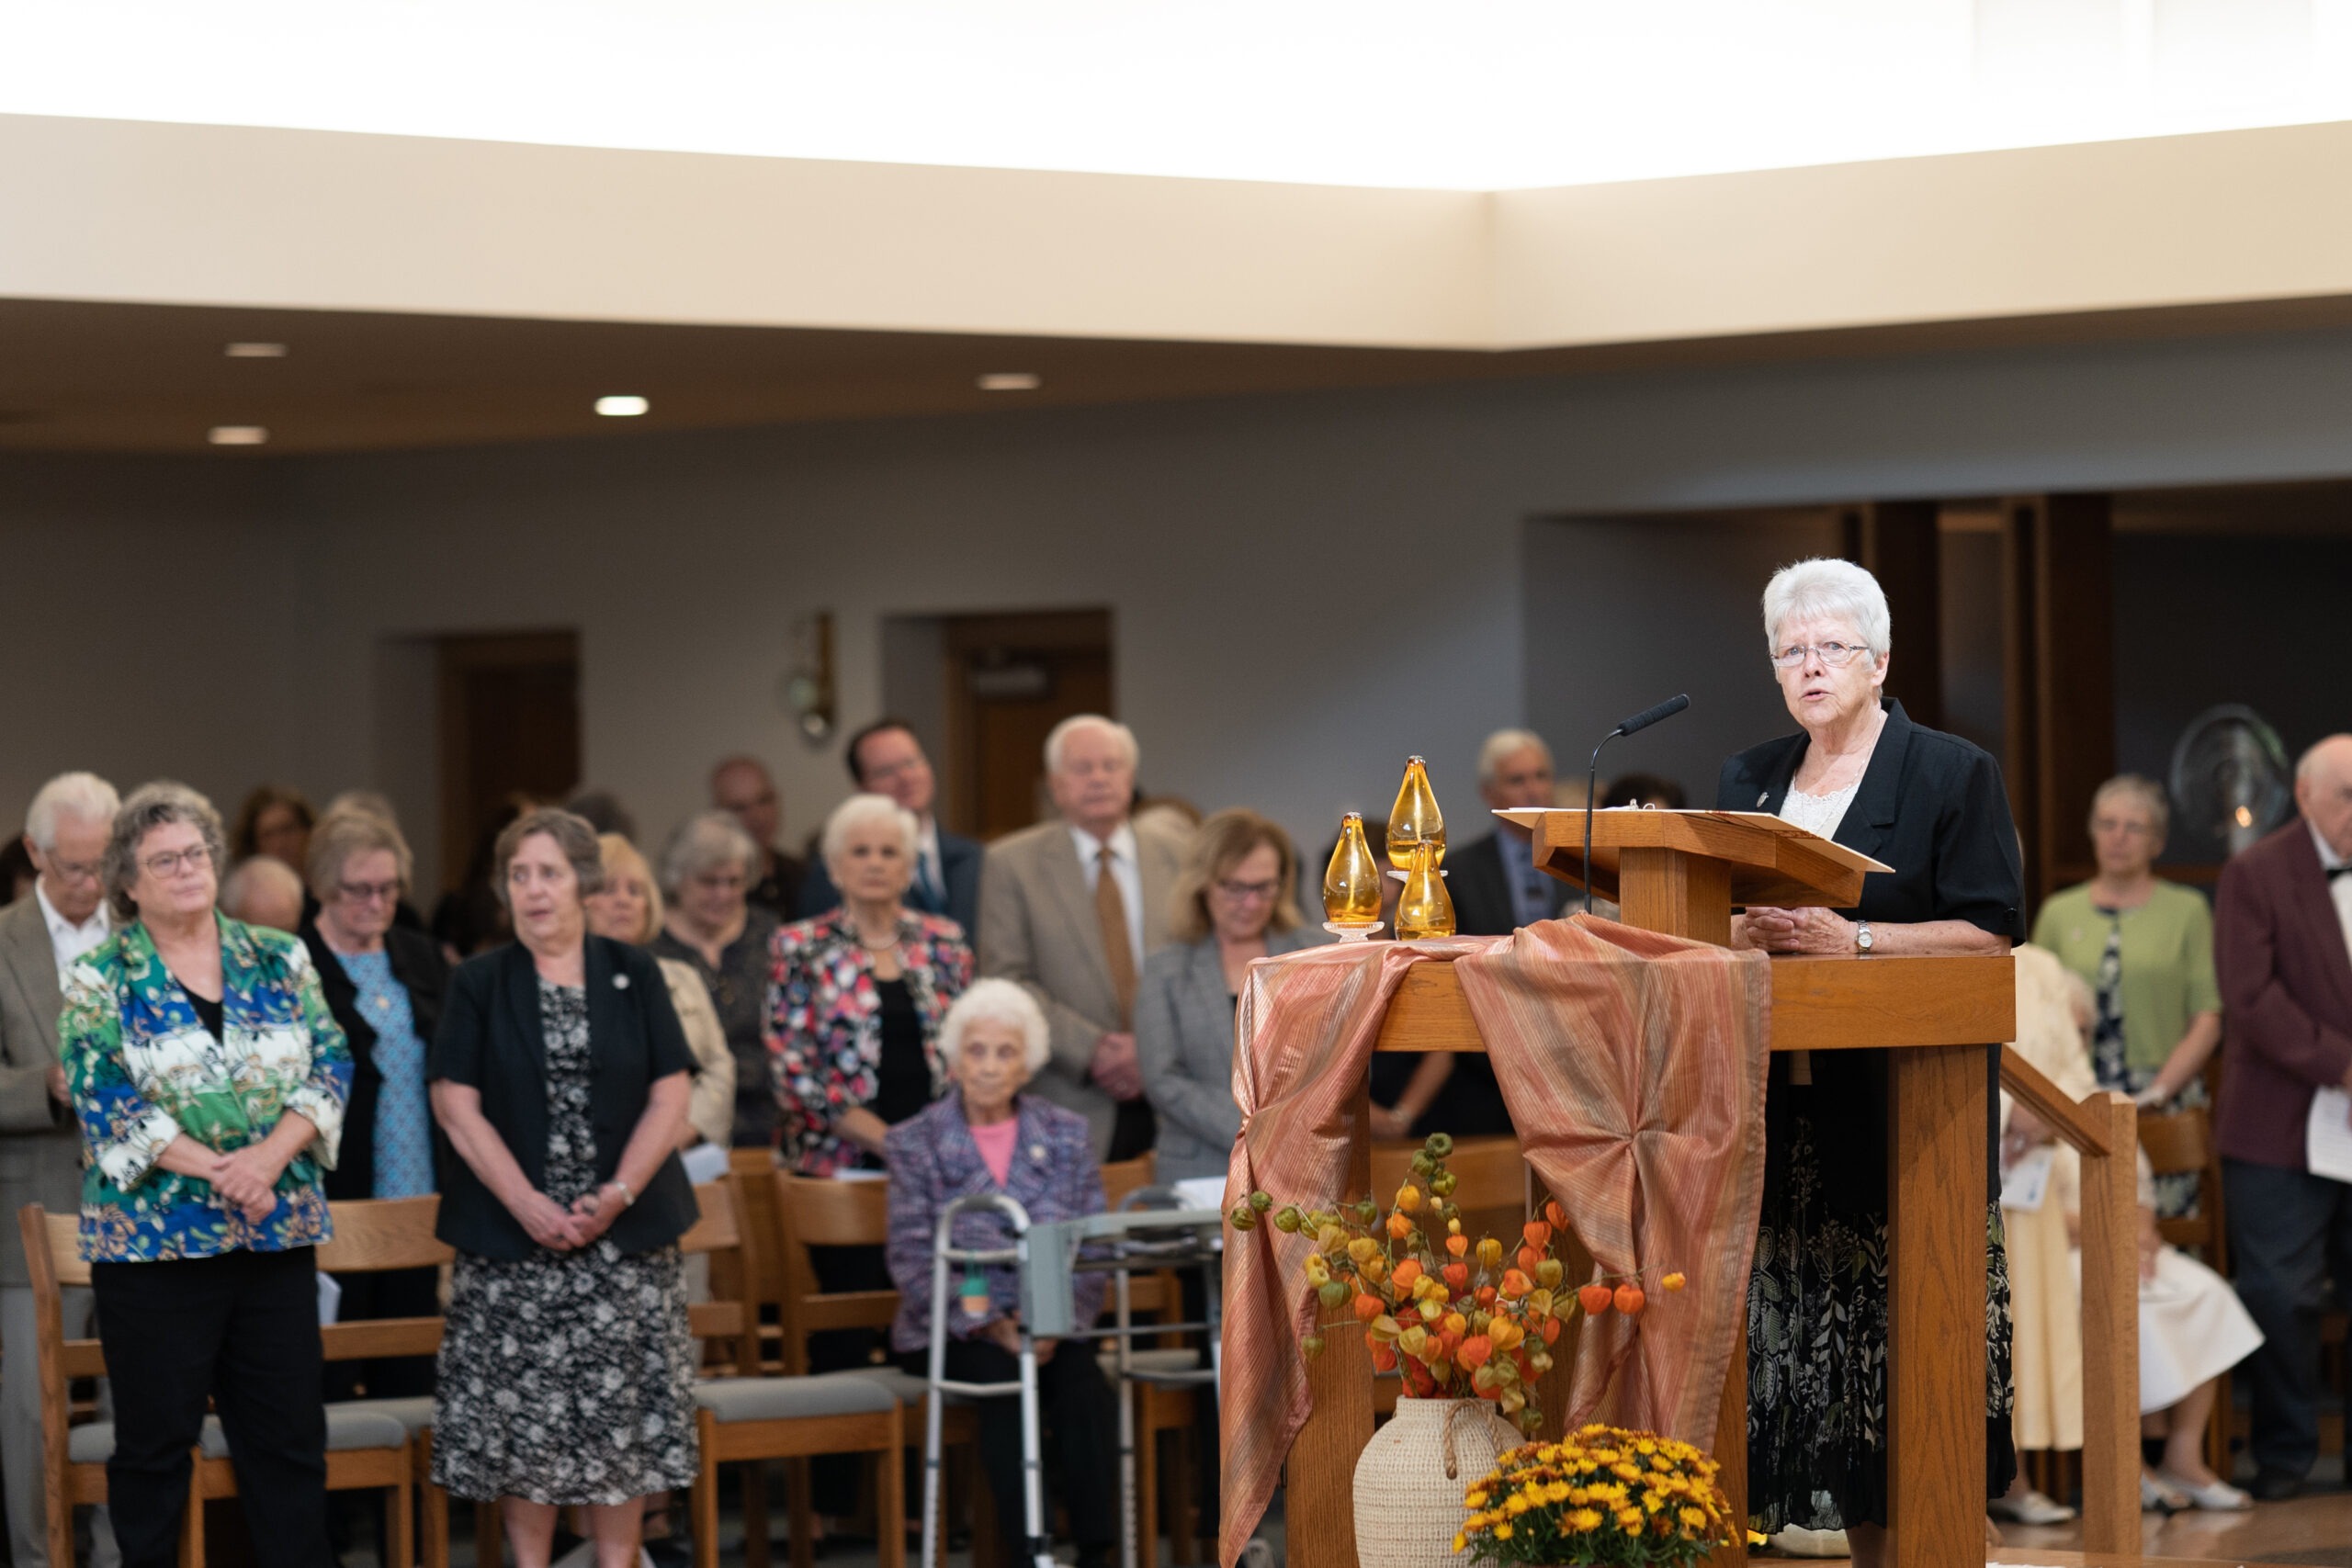 A group of Ursuline nuns stand during a reading at Mass.